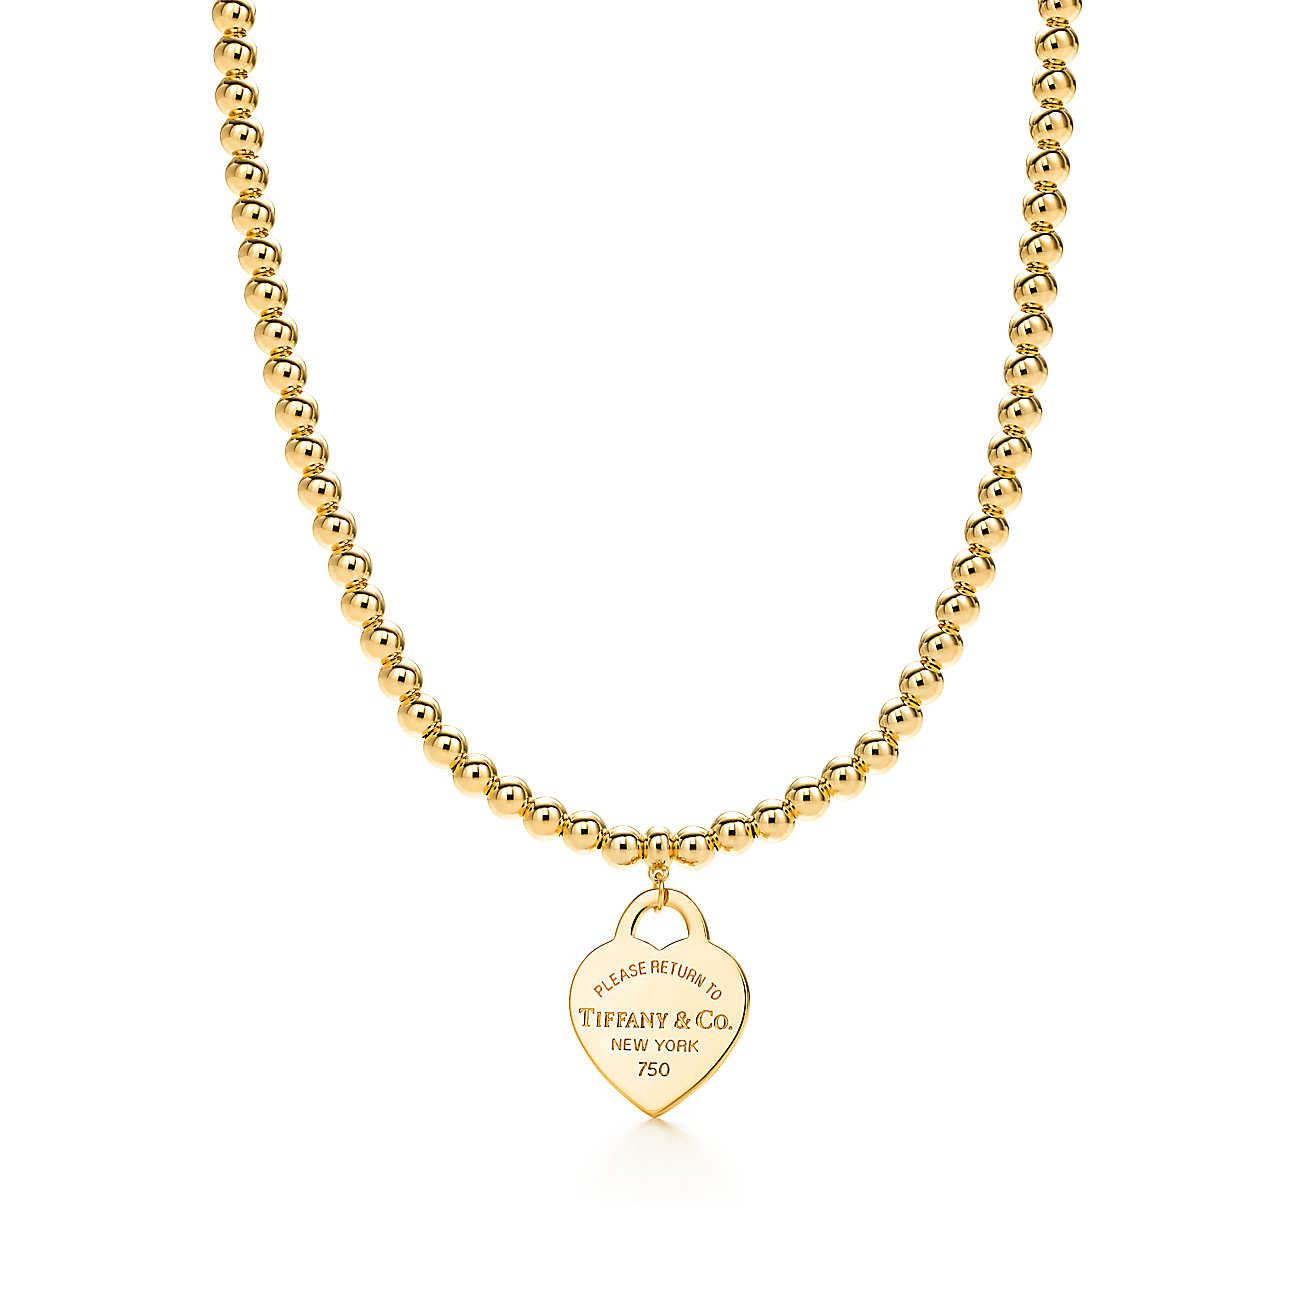 Tiffany Necklaces Under 200
 Return to Tiffany™ small heart tag in 18k gold on a bead